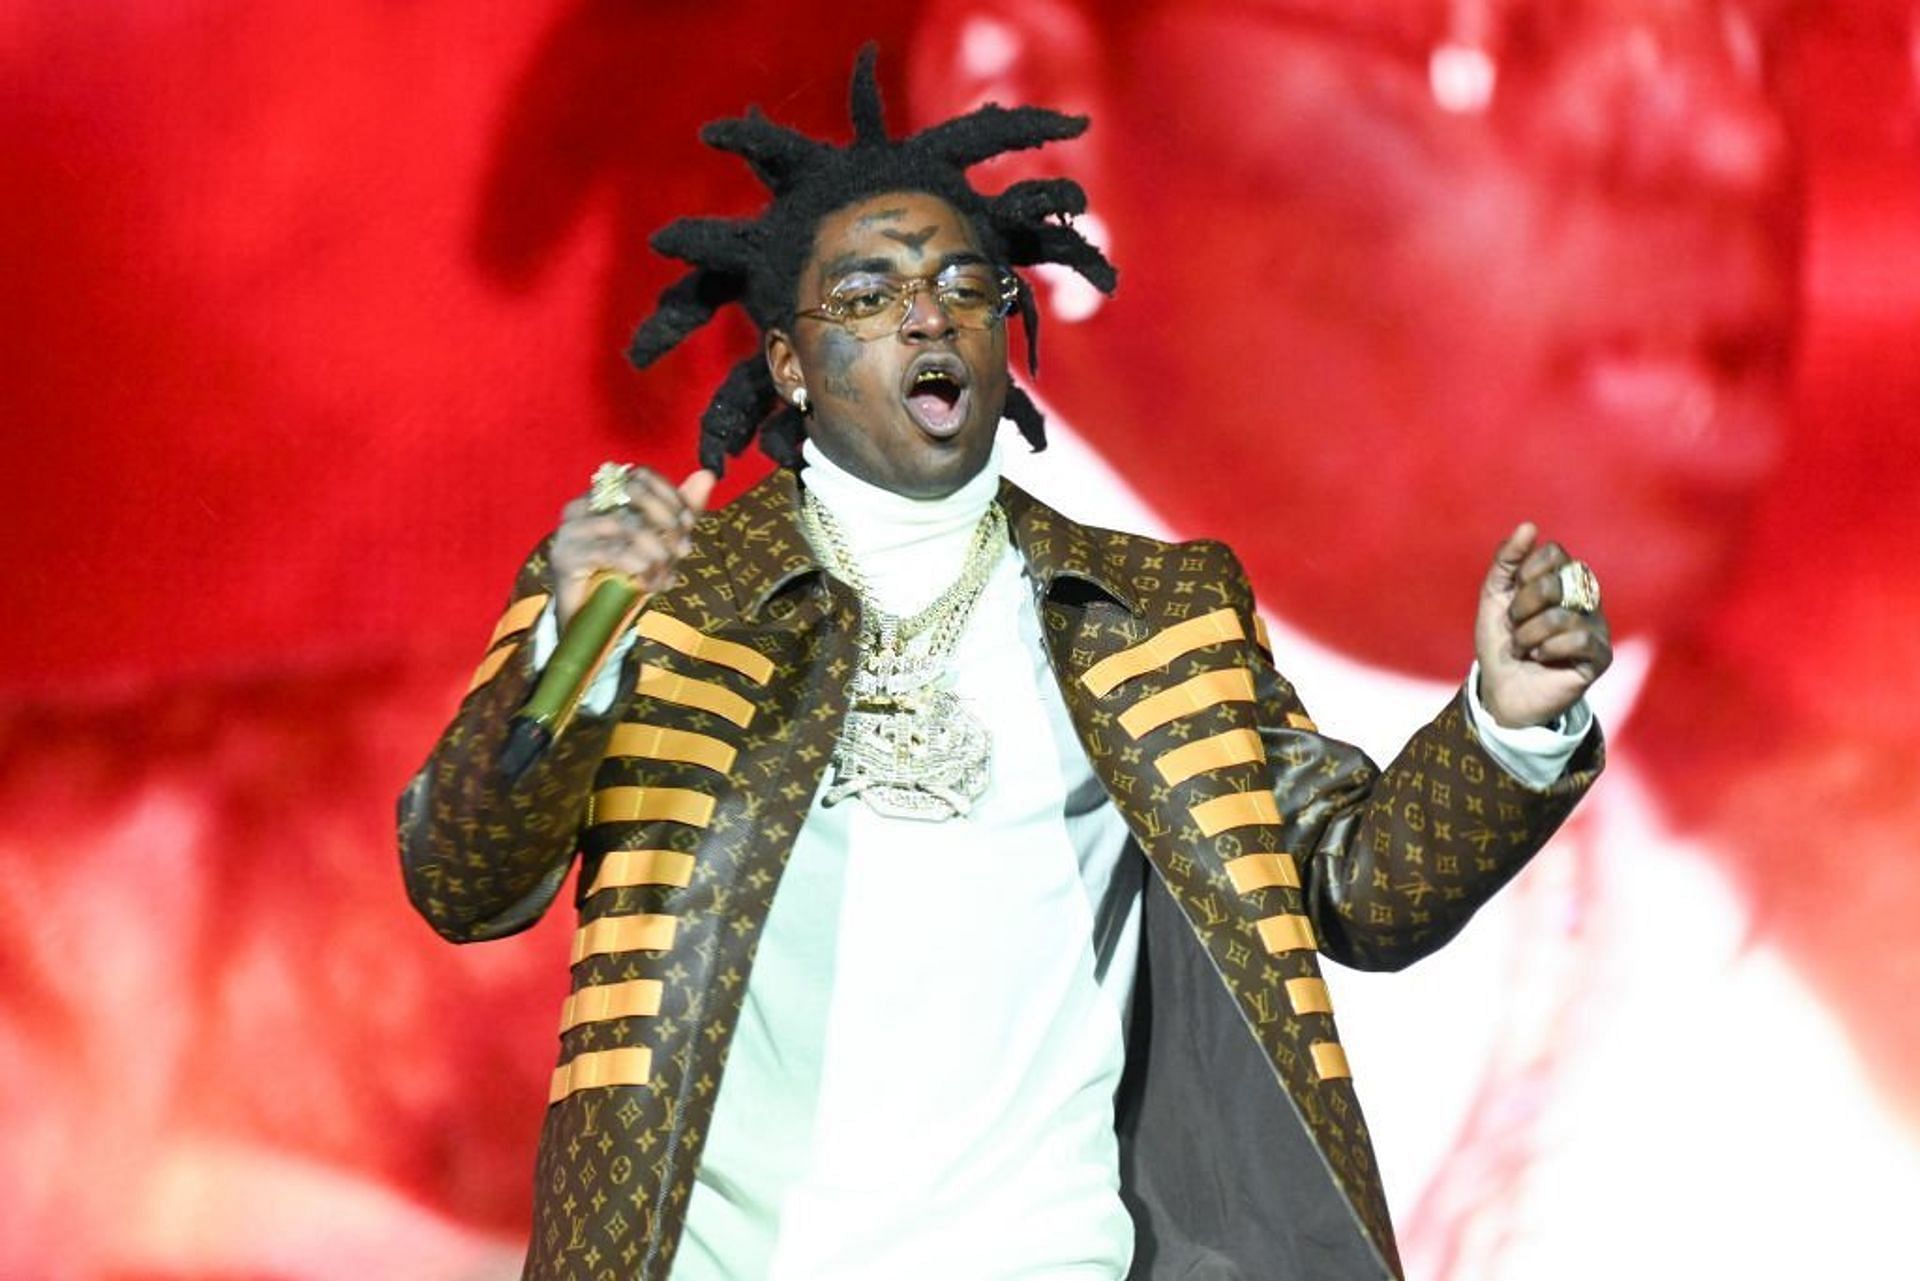 Kodak Black&#039;s new hairstyle was a topic of discussion on social media (Image via Getty Images/Astrida Valigorsky)